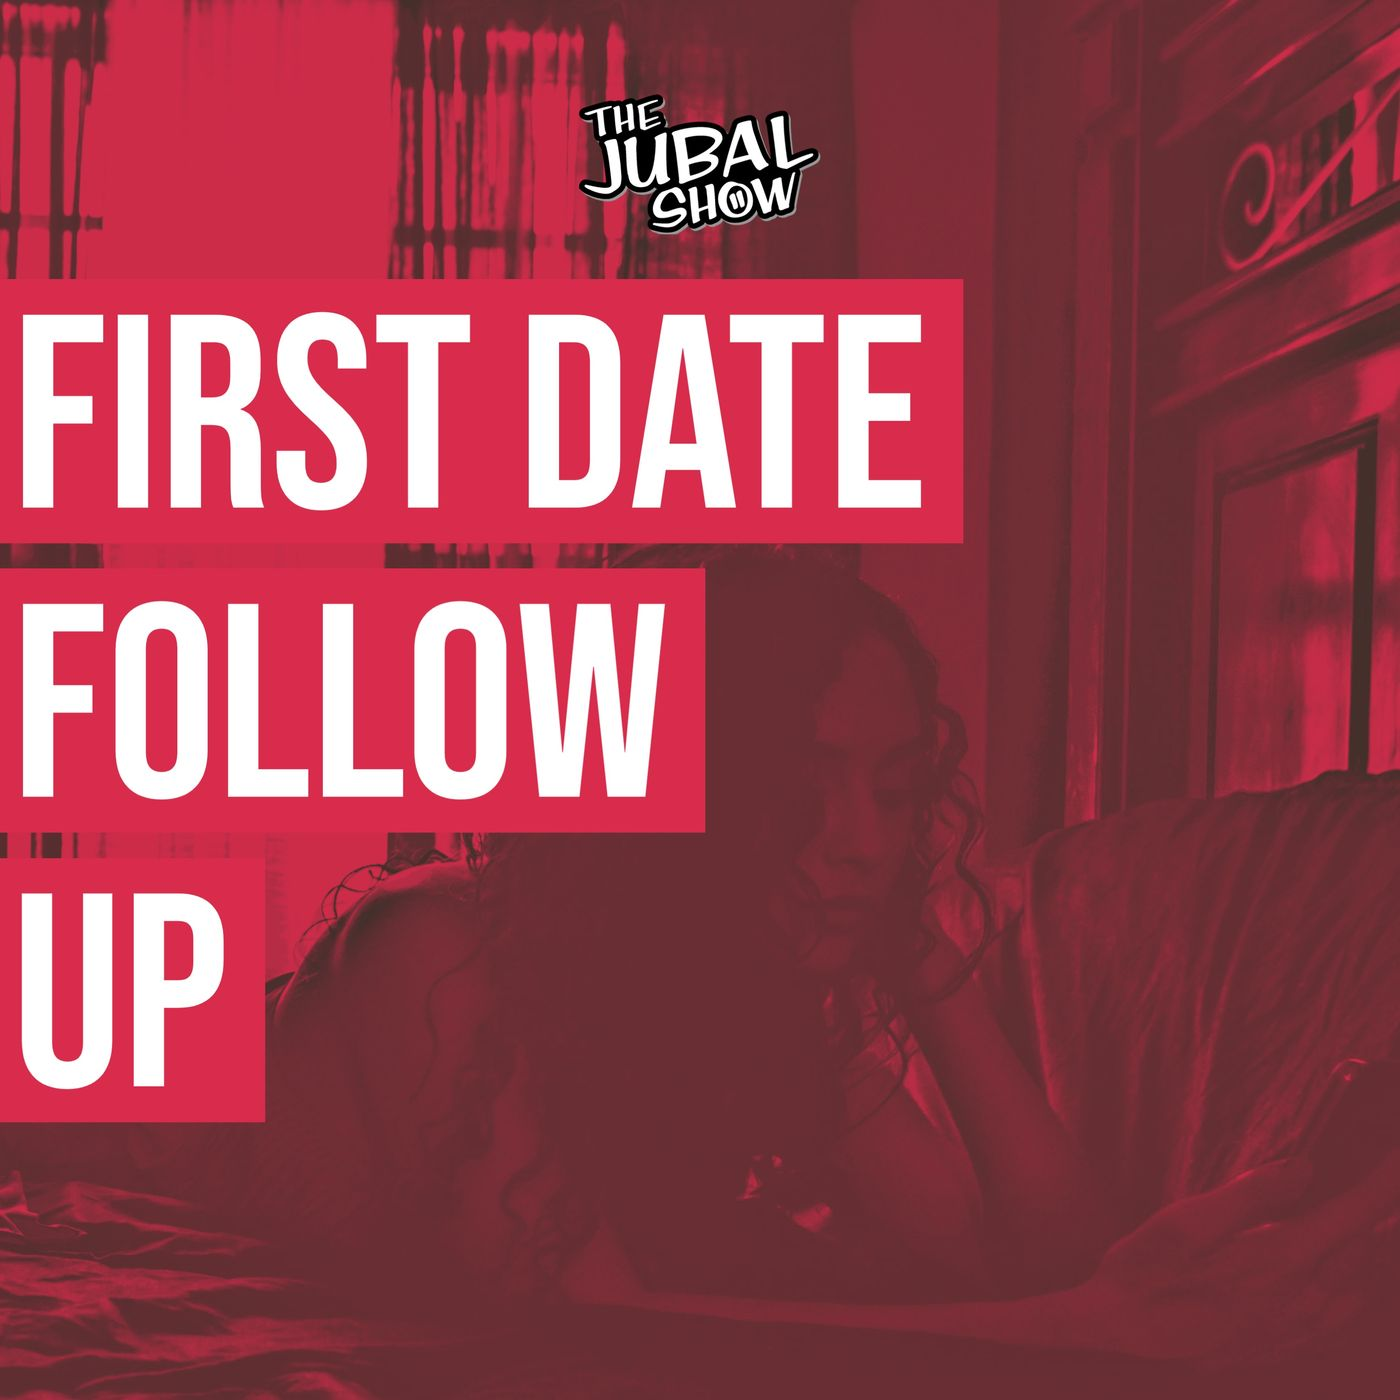 This First Date Follow Up cannot be seen in the stars!